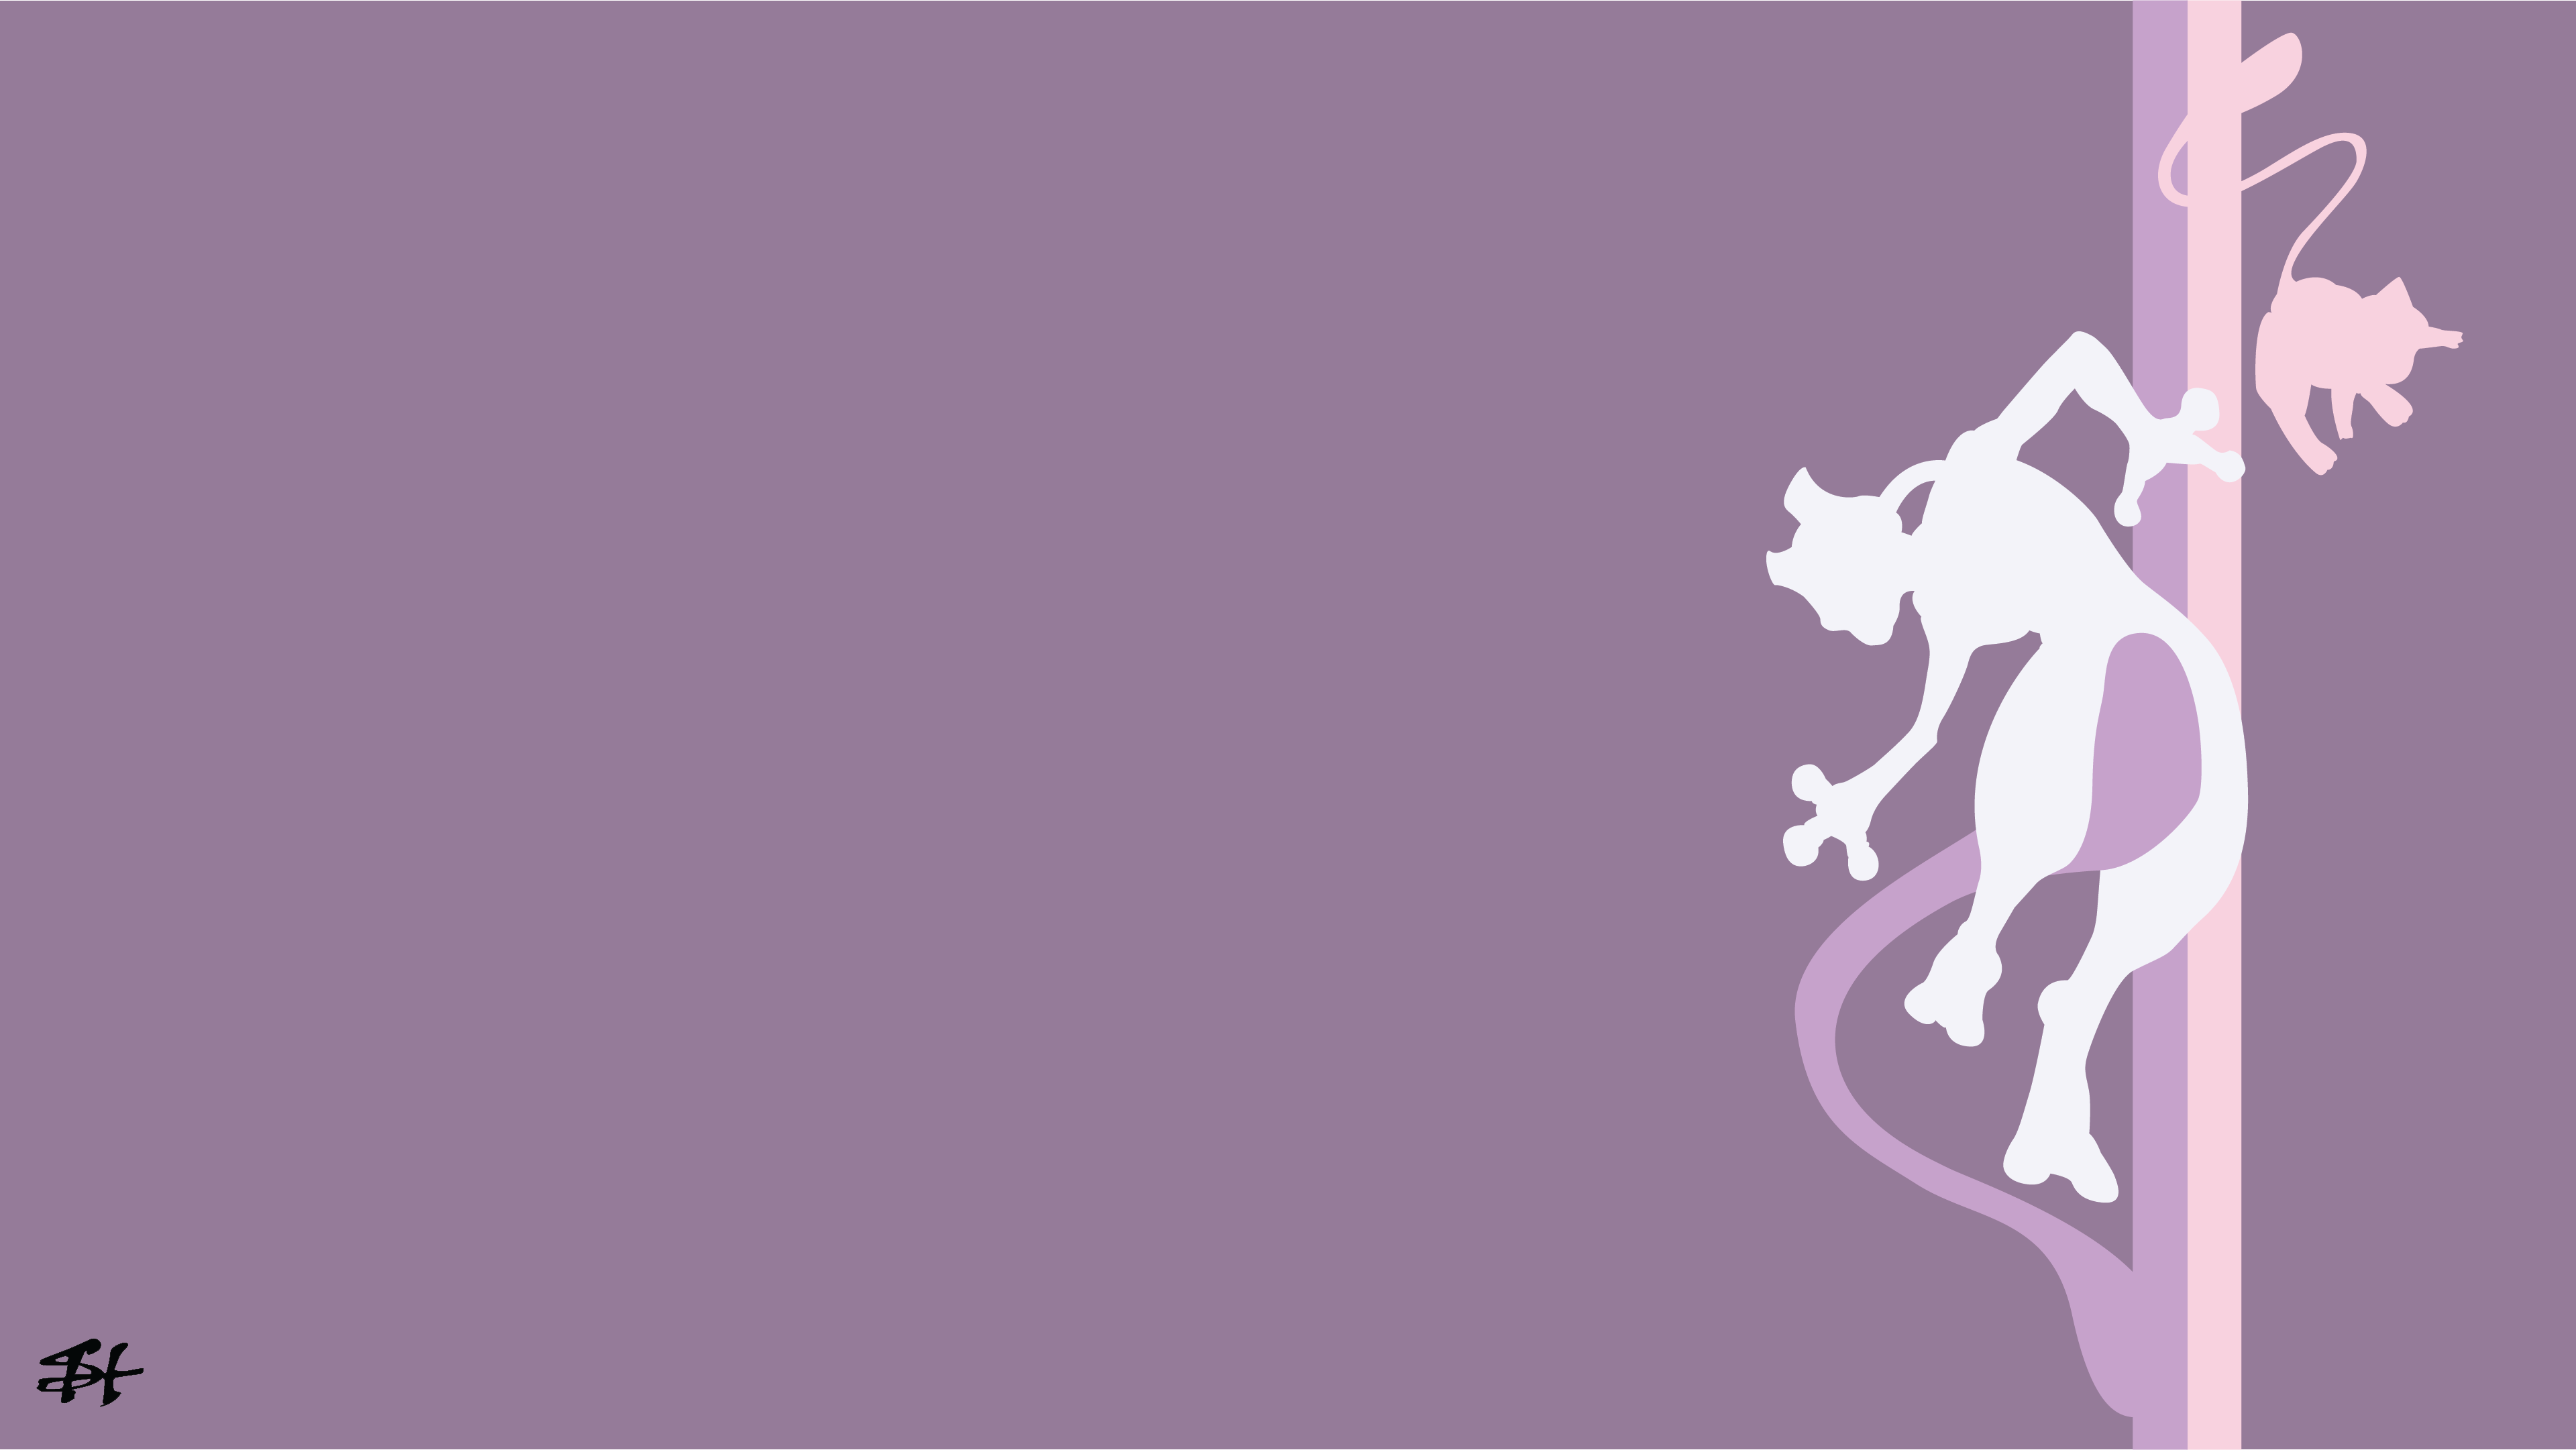 Mew and Mewtwo 4k Ultra HD Wallpaper. Background Imagex2162